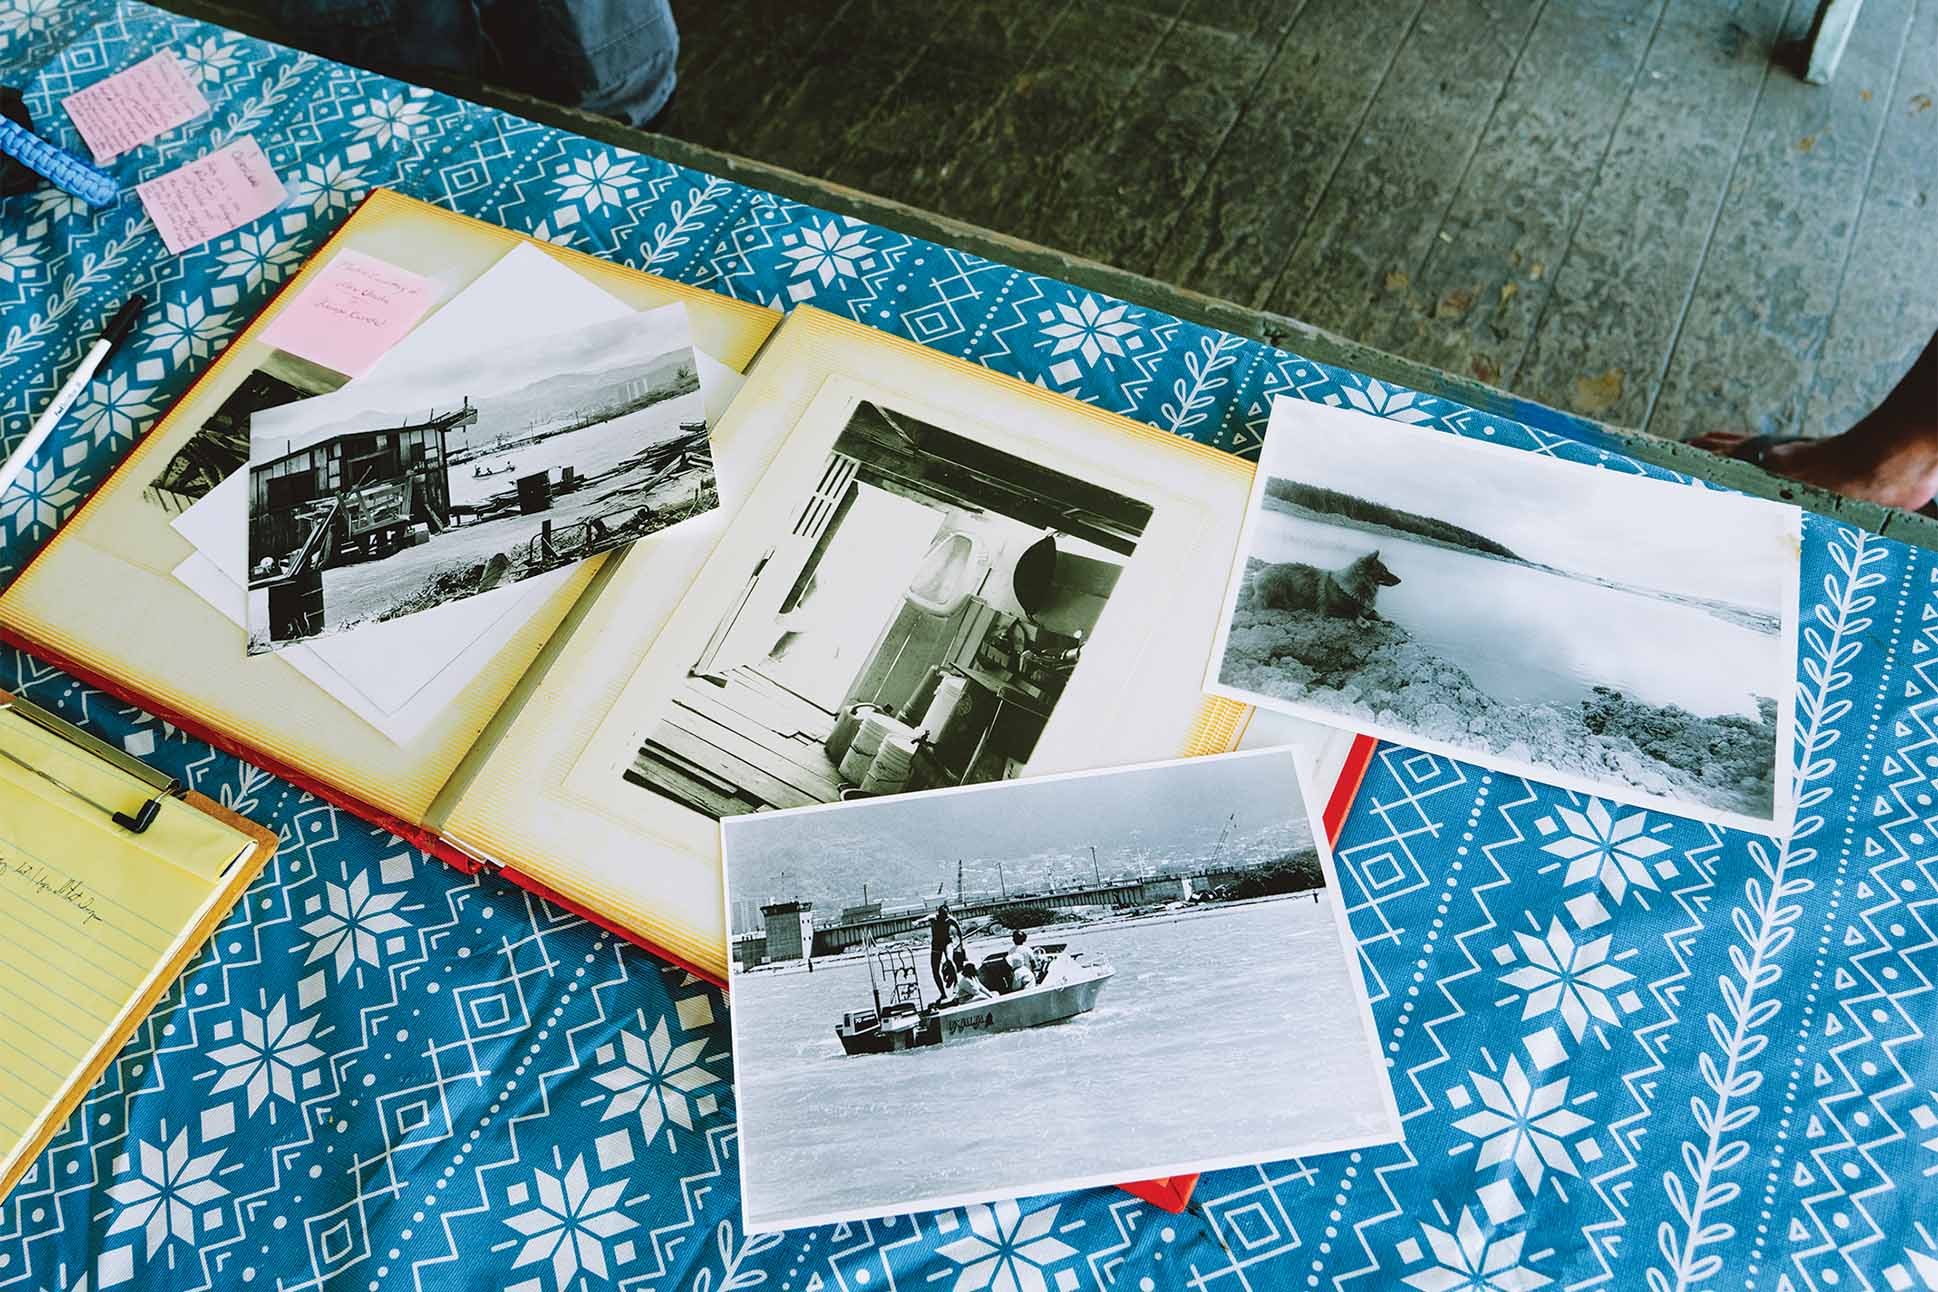 a photo album with pictures spread out of mokauea island